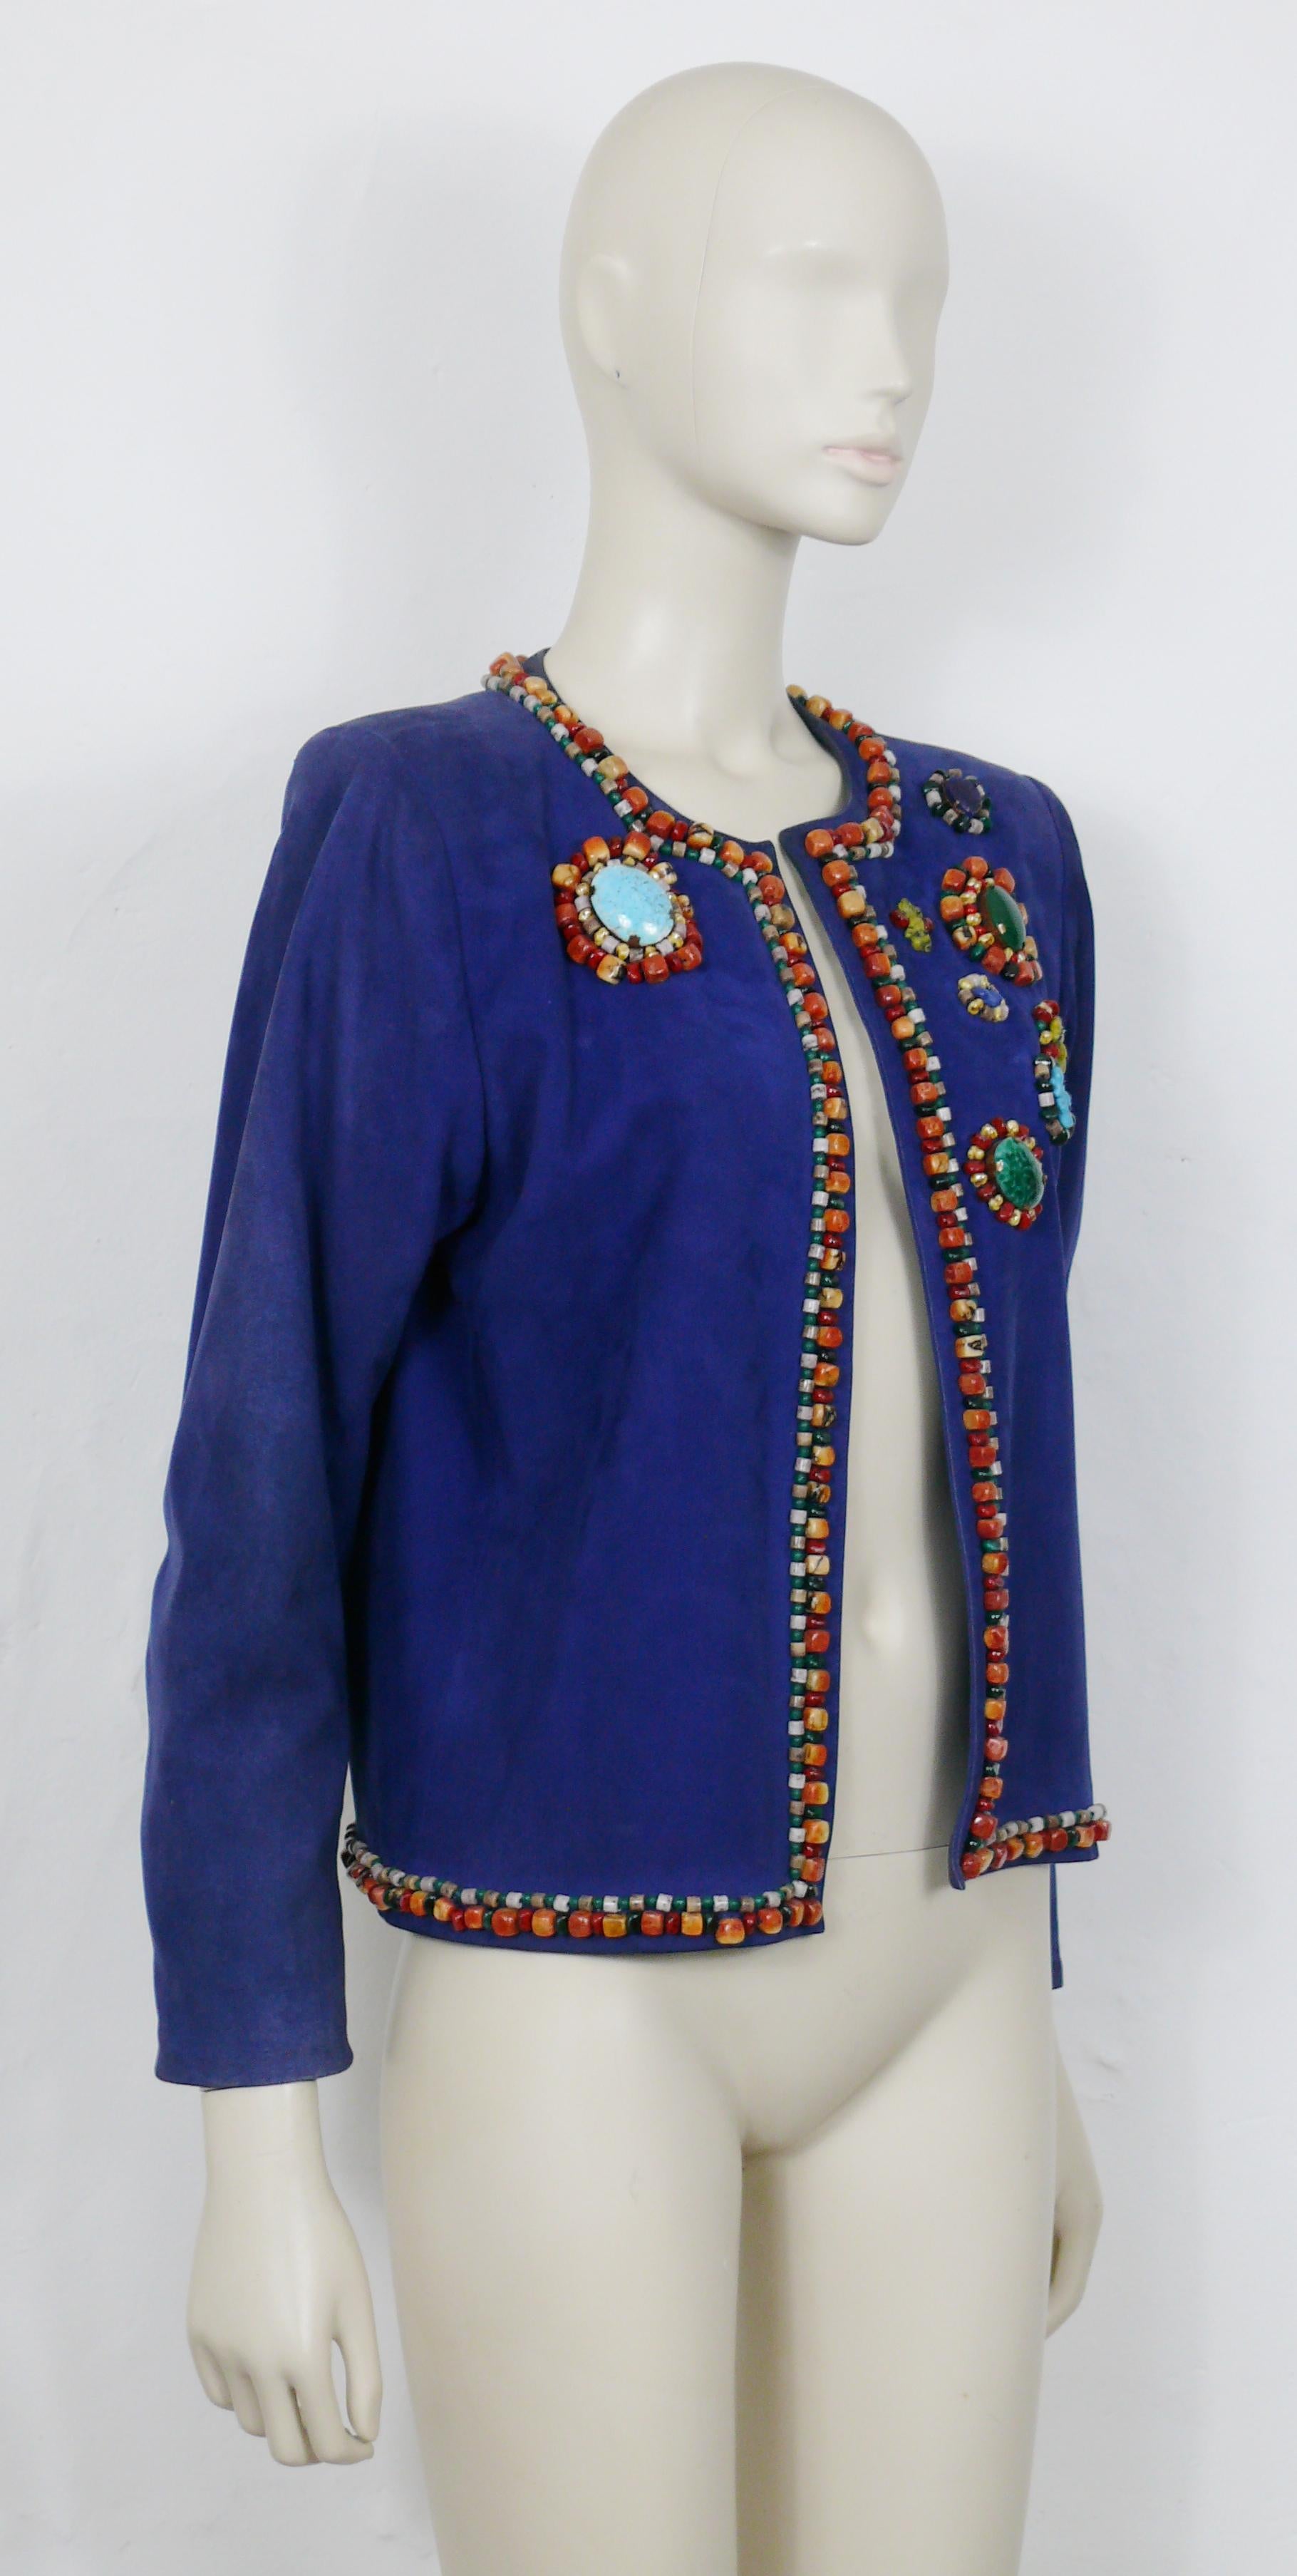 YVES SAINT LAURENT vintage blue lambskin jacket beautifully embellished with multicolored glass cabochons and resin beads.

This jacket features :
- Blue color lambskin.
- Embroidered resin beads and multicolored glass cabochons.
- No buttoning.
-